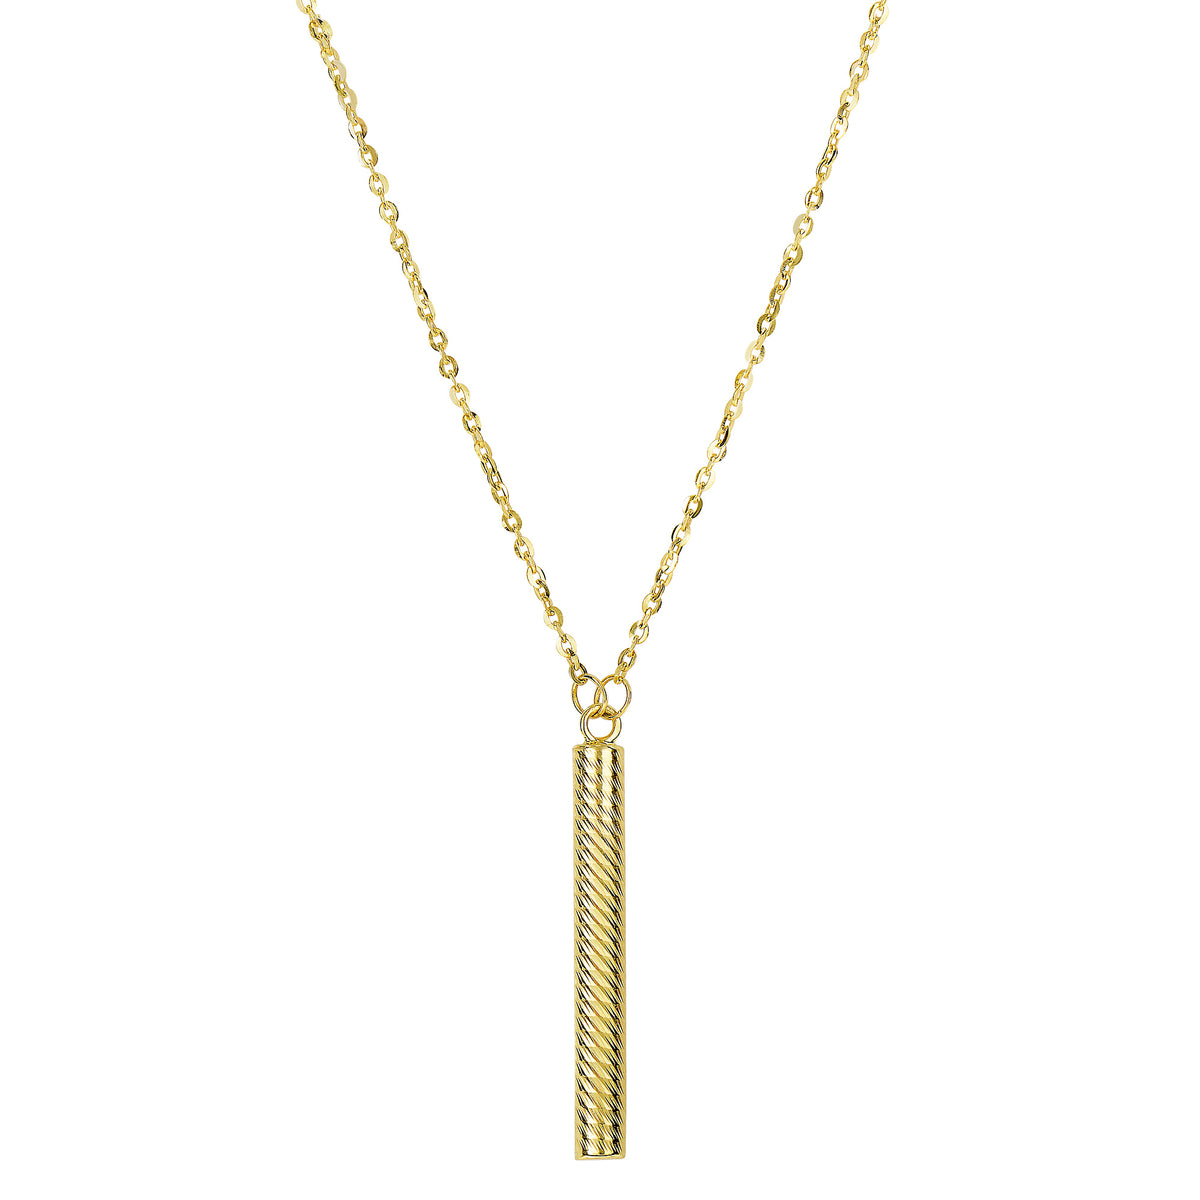 14k Yellow Gold Textured Hanging Bar Pendant Necklace, 18" fine designer jewelry for men and women